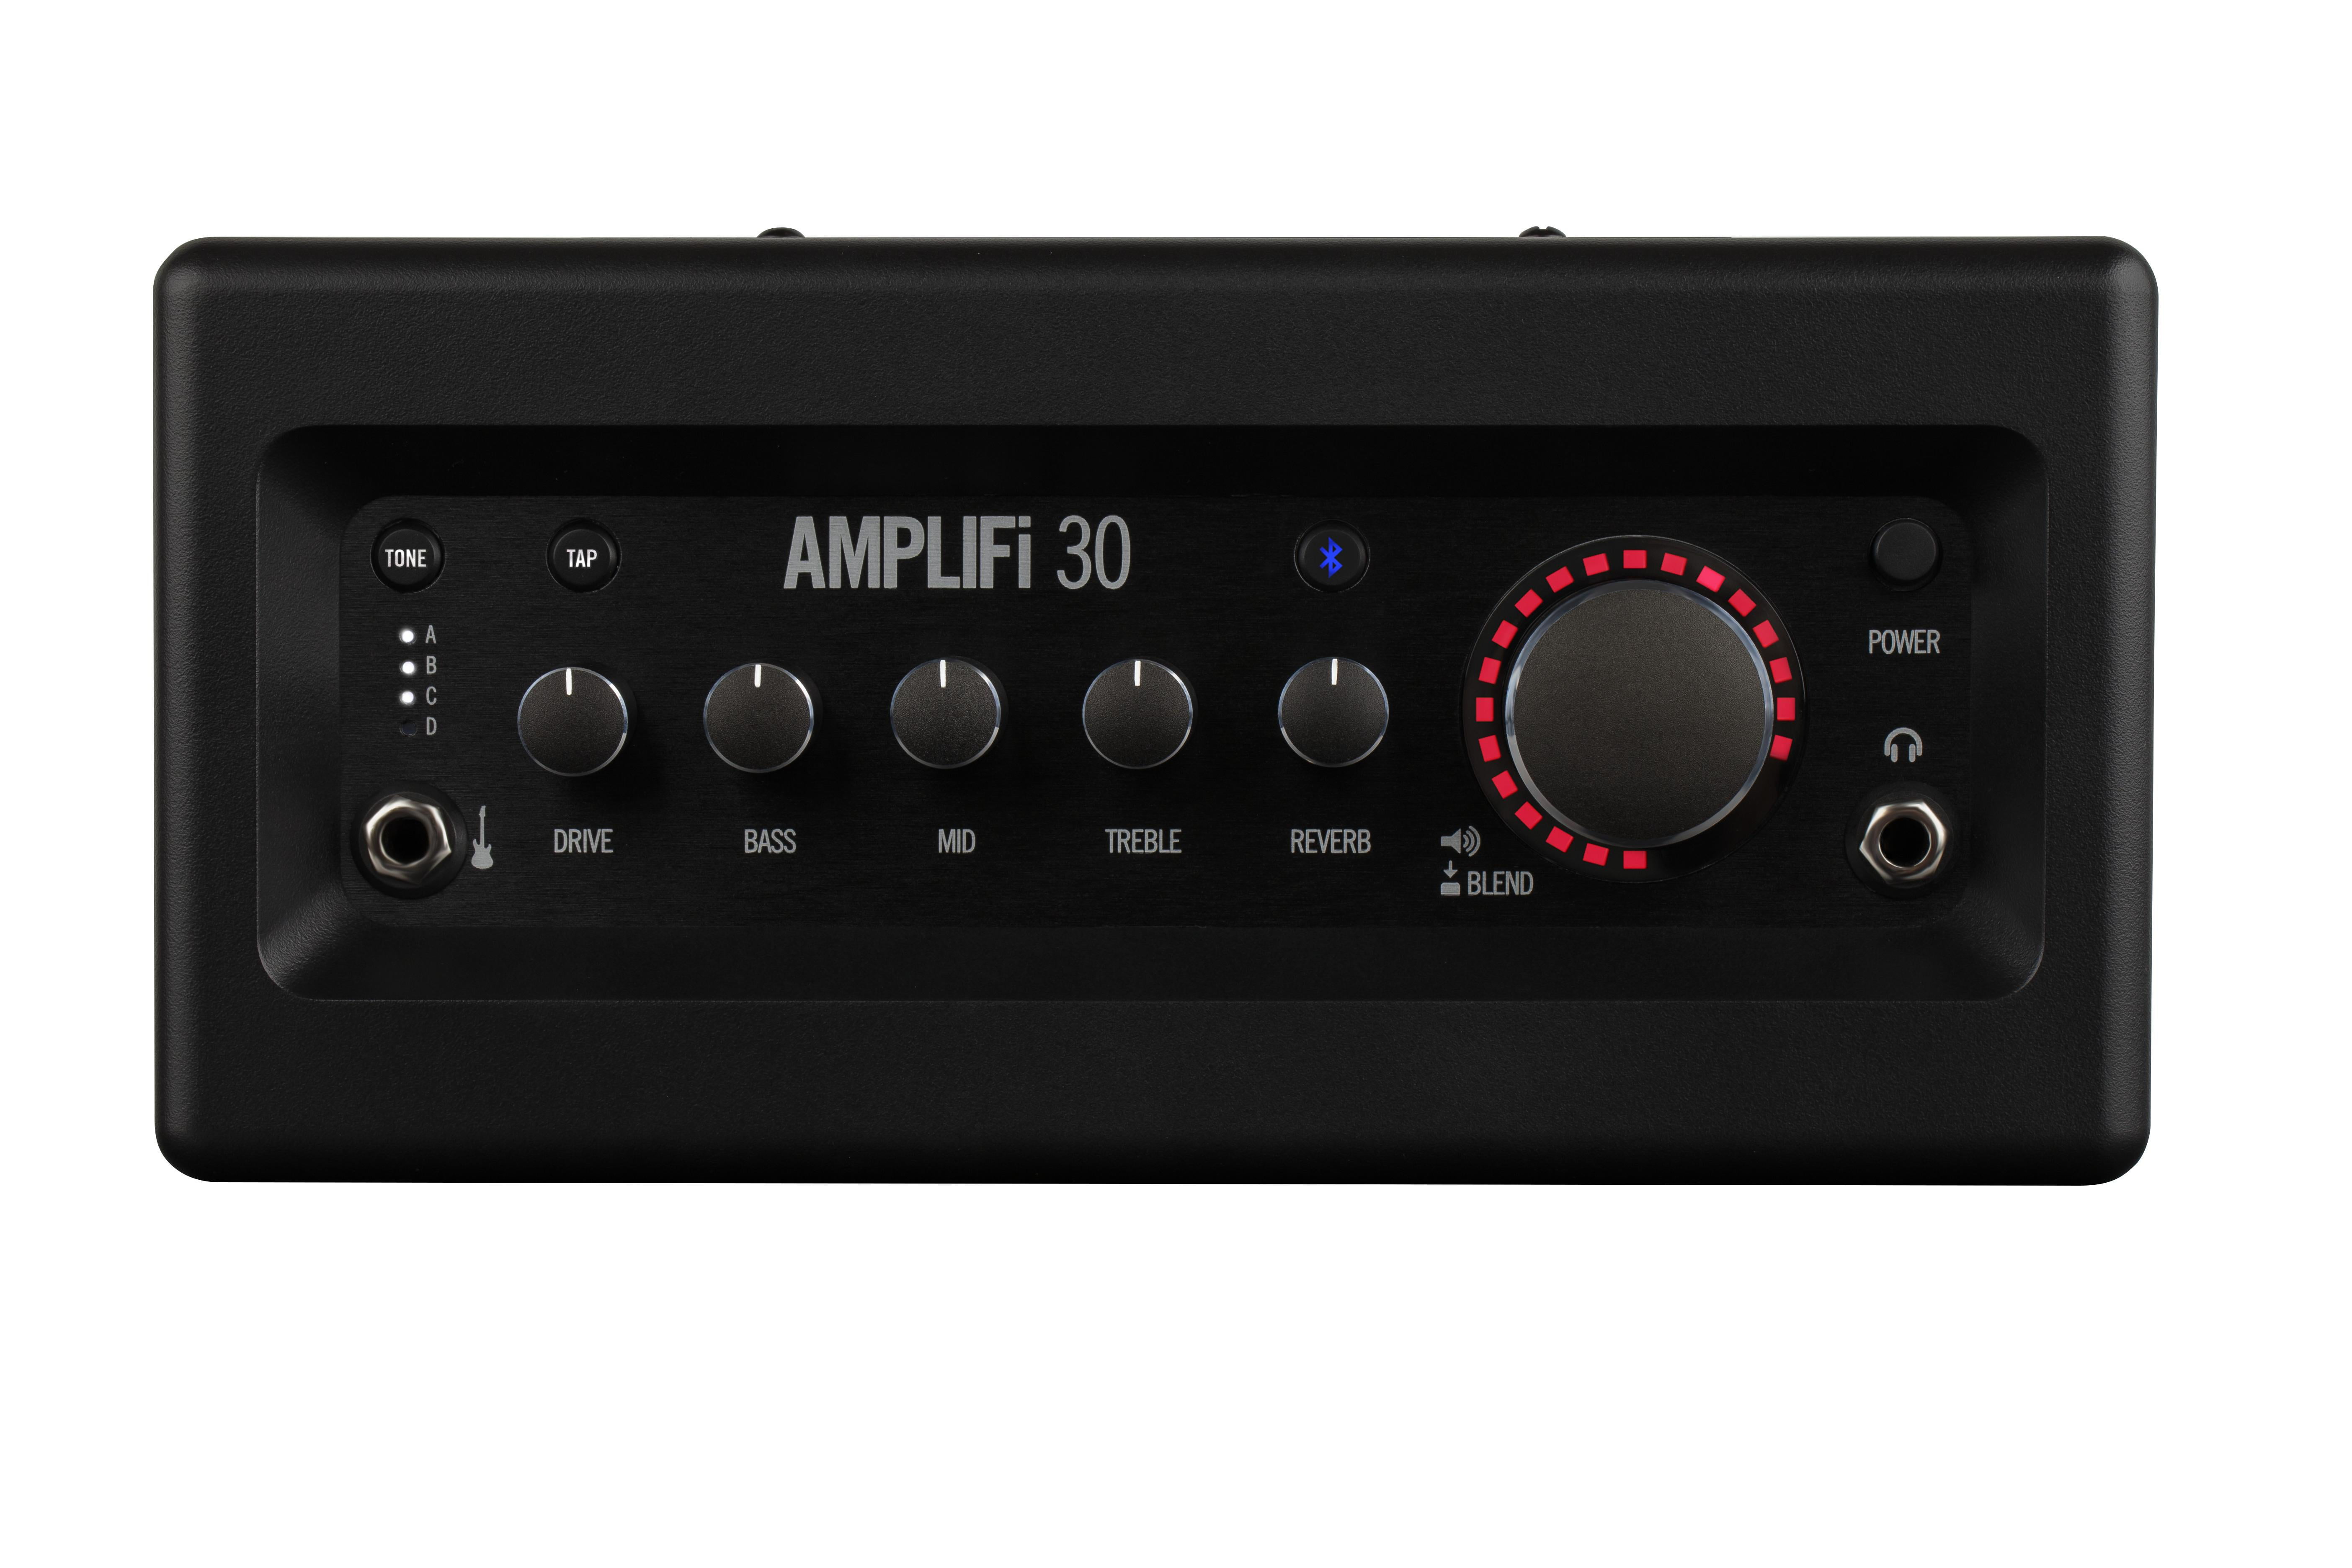 Line 6 AMPLIFI 30 30-Watt Compact Guitar Amp with Stereo Speakers